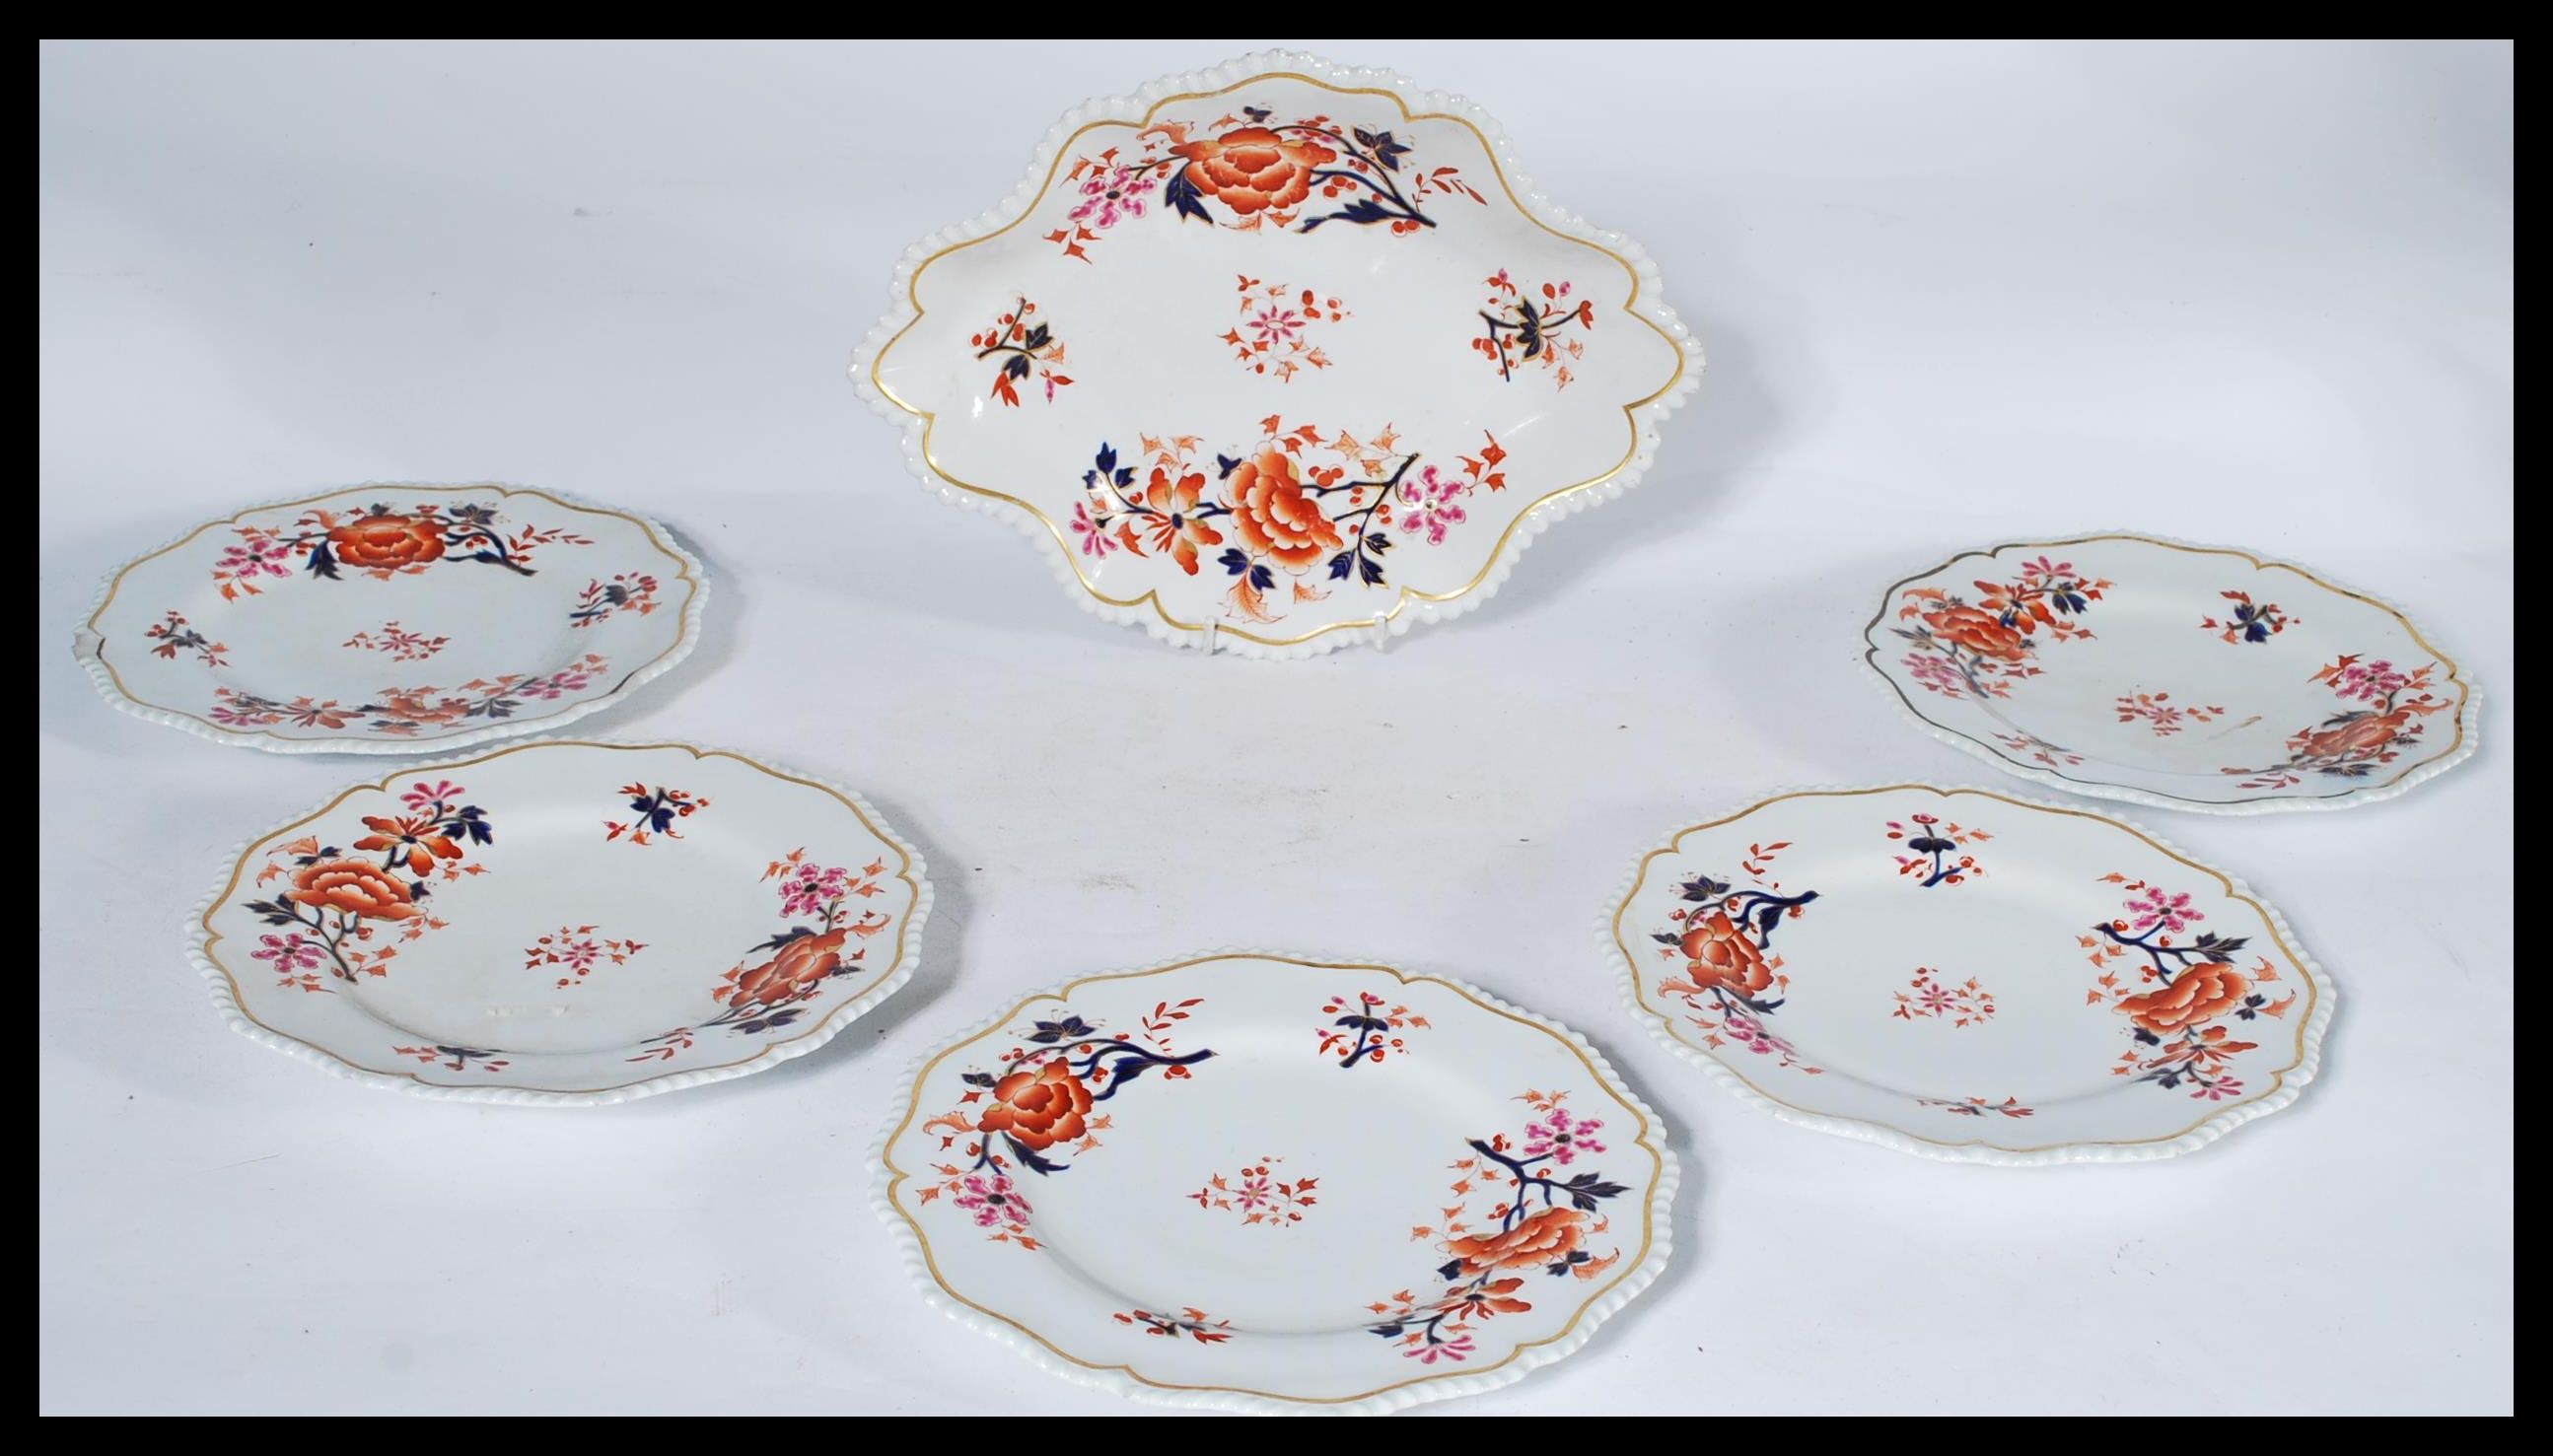 An early 19th century Flight Barr and Barr Worcester dessert set consisitng of plates and a - Image 2 of 5